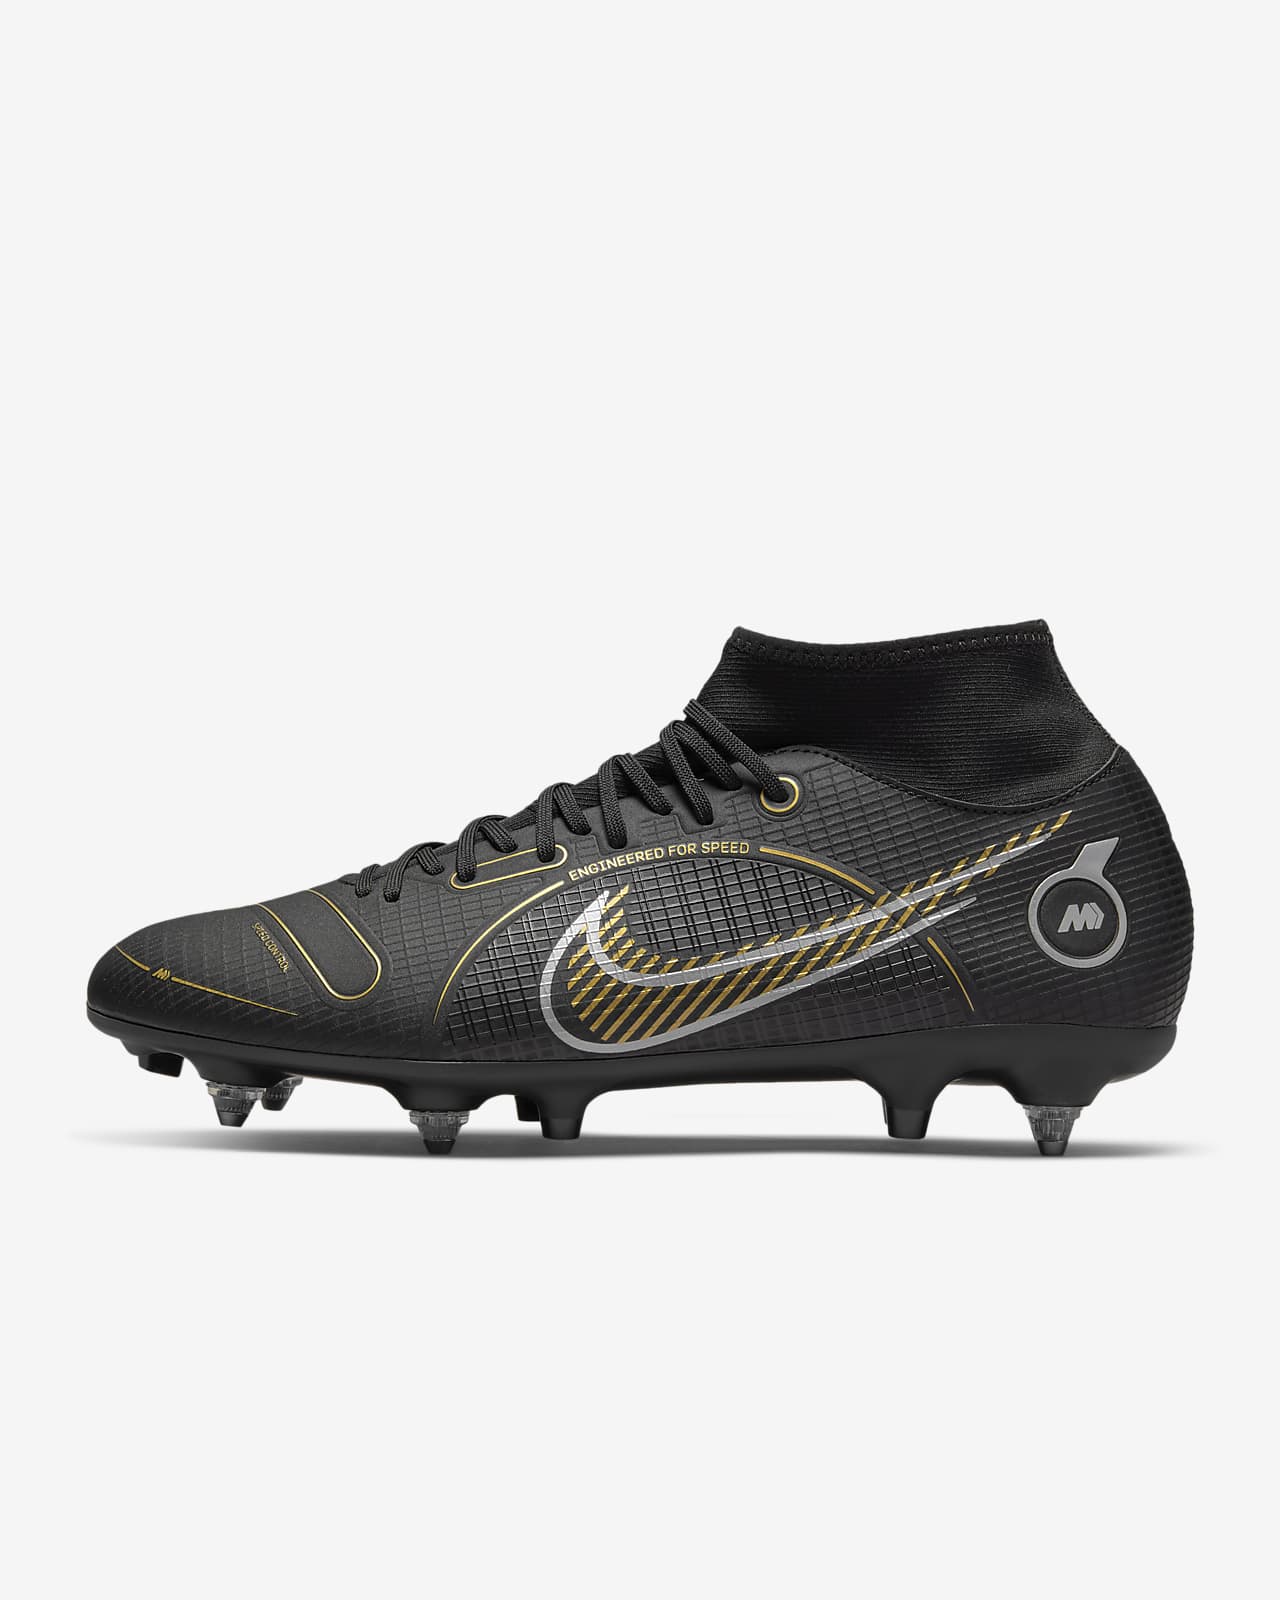 Nike Mercurial Superfly 8 Academy SG-PRO Anti-Clog Traction Soft-Ground Football Boots